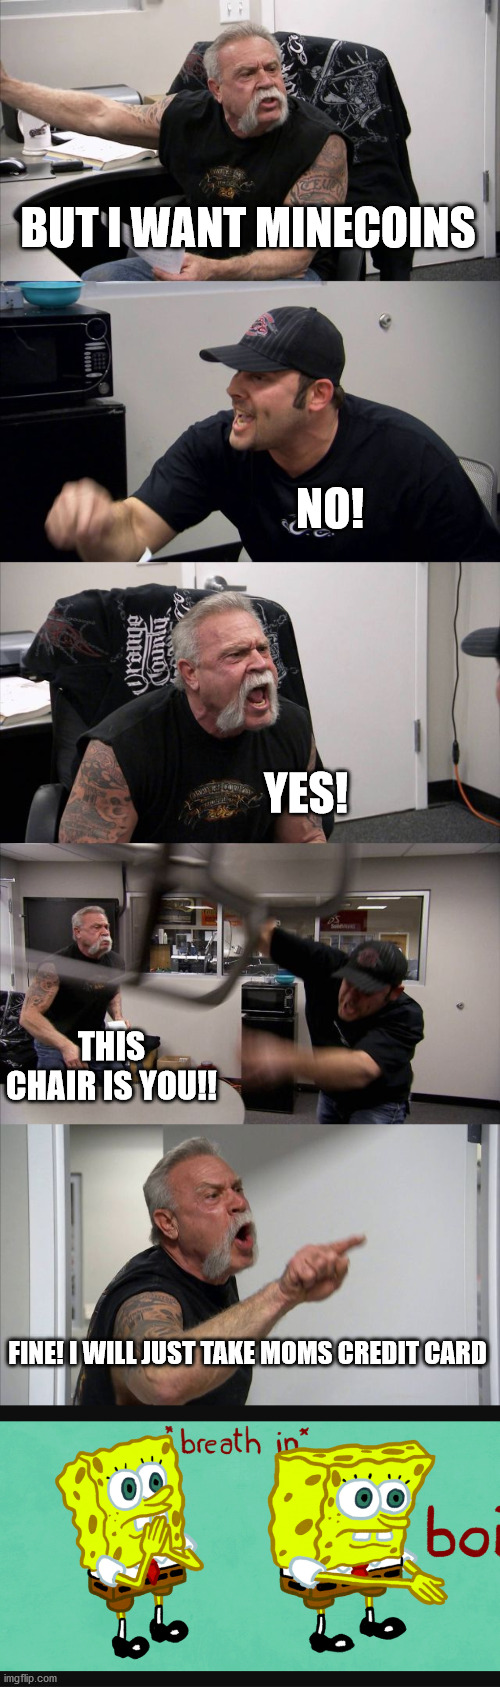 what the actual hell | BUT I WANT MINECOINS; NO! YES! THIS CHAIR IS YOU!! FINE! I WILL JUST TAKE MOMS CREDIT CARD | image tagged in memes,american chopper argument | made w/ Imgflip meme maker